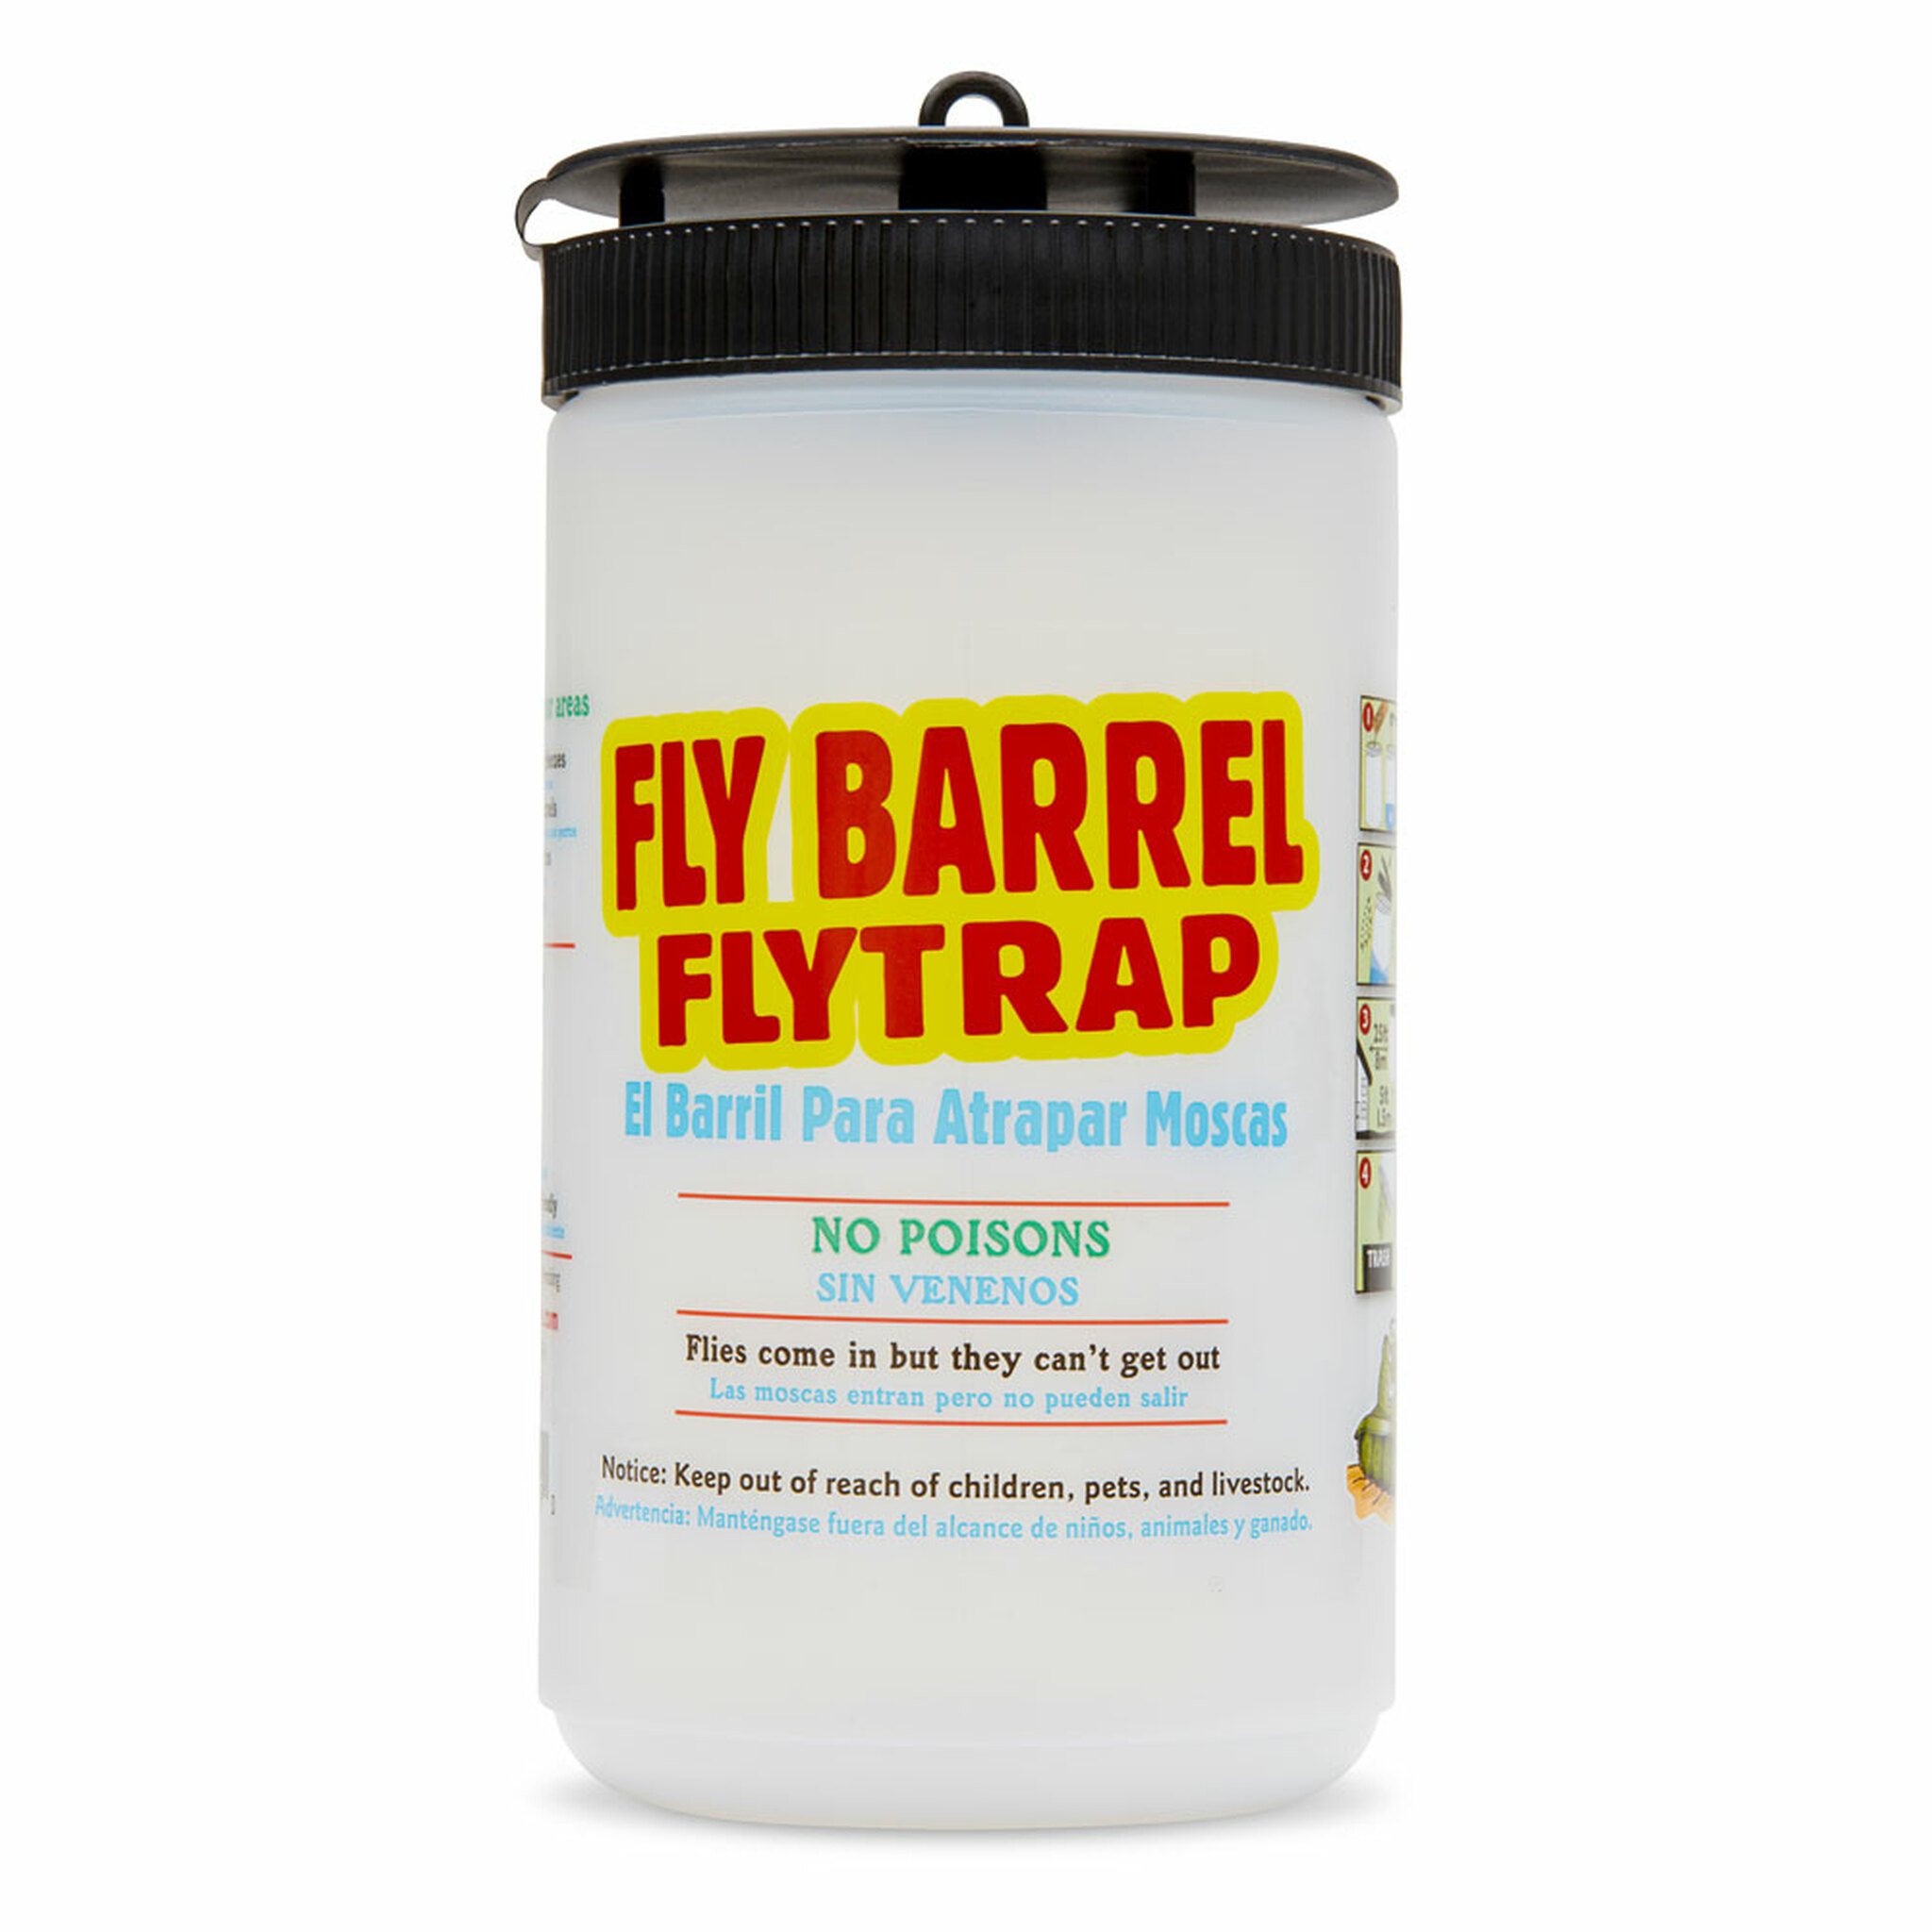 FLIES BE GONE FLY BARREL,
COMPLETE WITH 2 PACKETS KM34
BAIT, ONE FOR IMMEDIATE USE
AND SECOND IS FREE REFILL,
ALSO WITH STEEL REINFORCED
SUSPENSION STRAP, EACH, 8/21